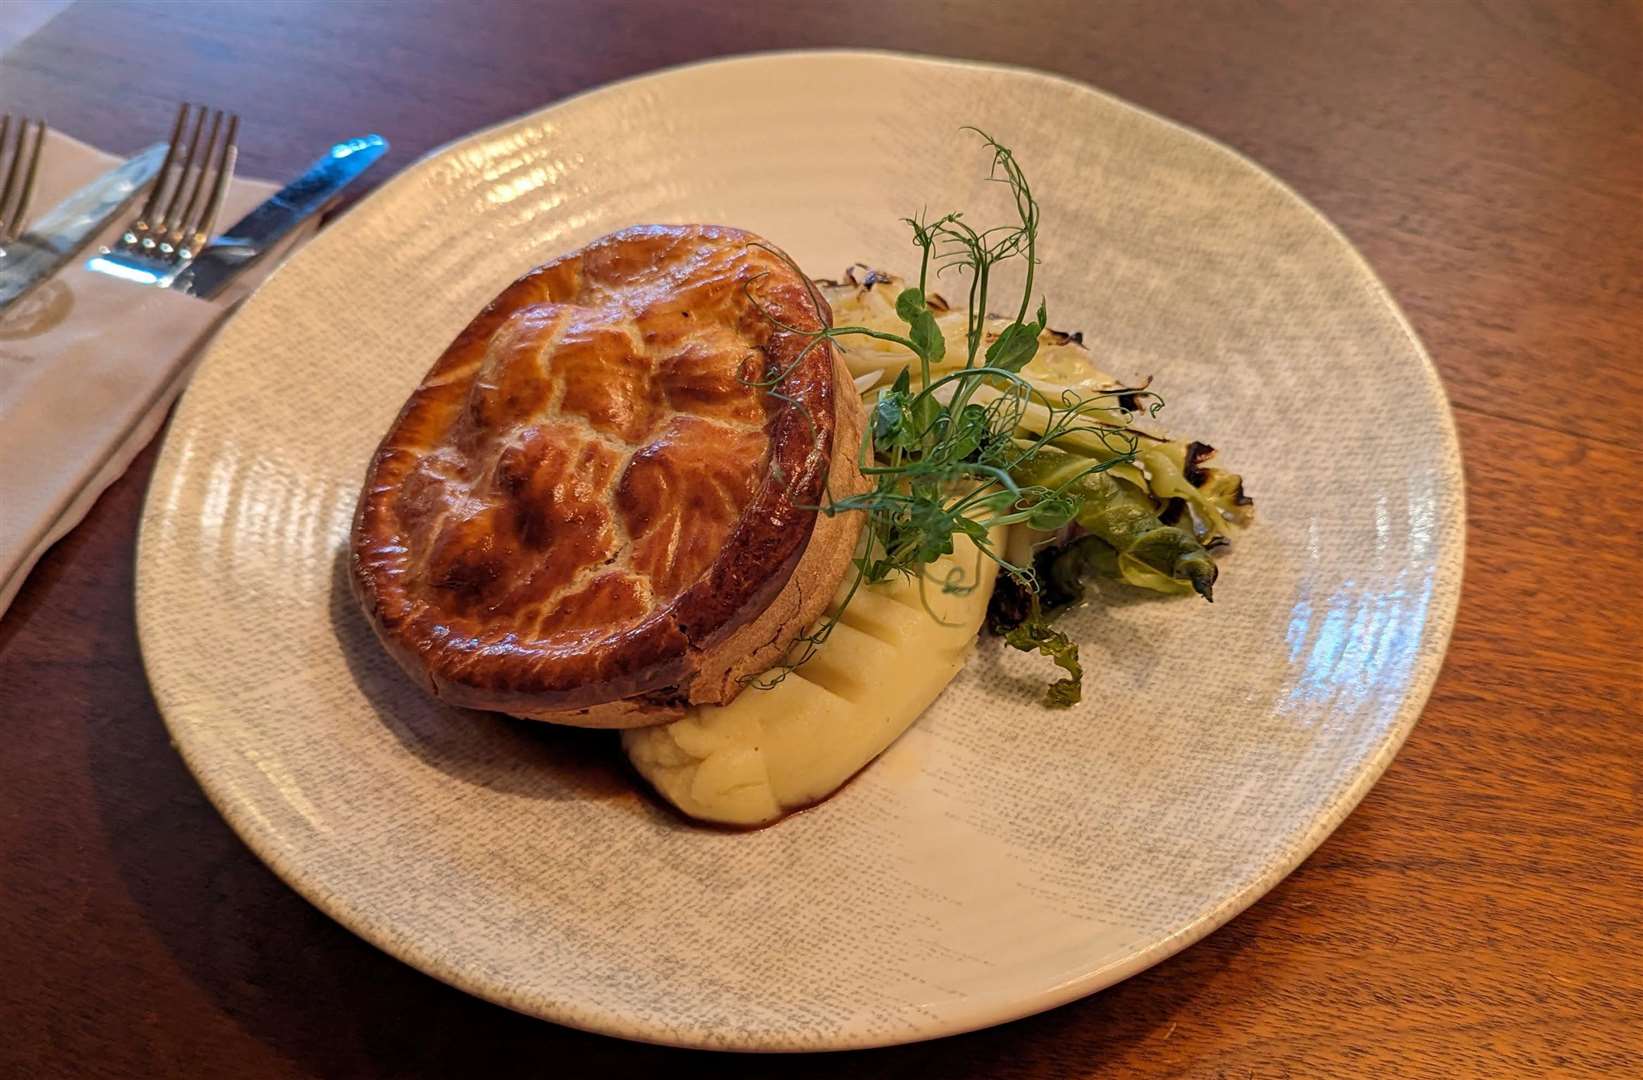 A game pie served at the Kings Arms in Elham